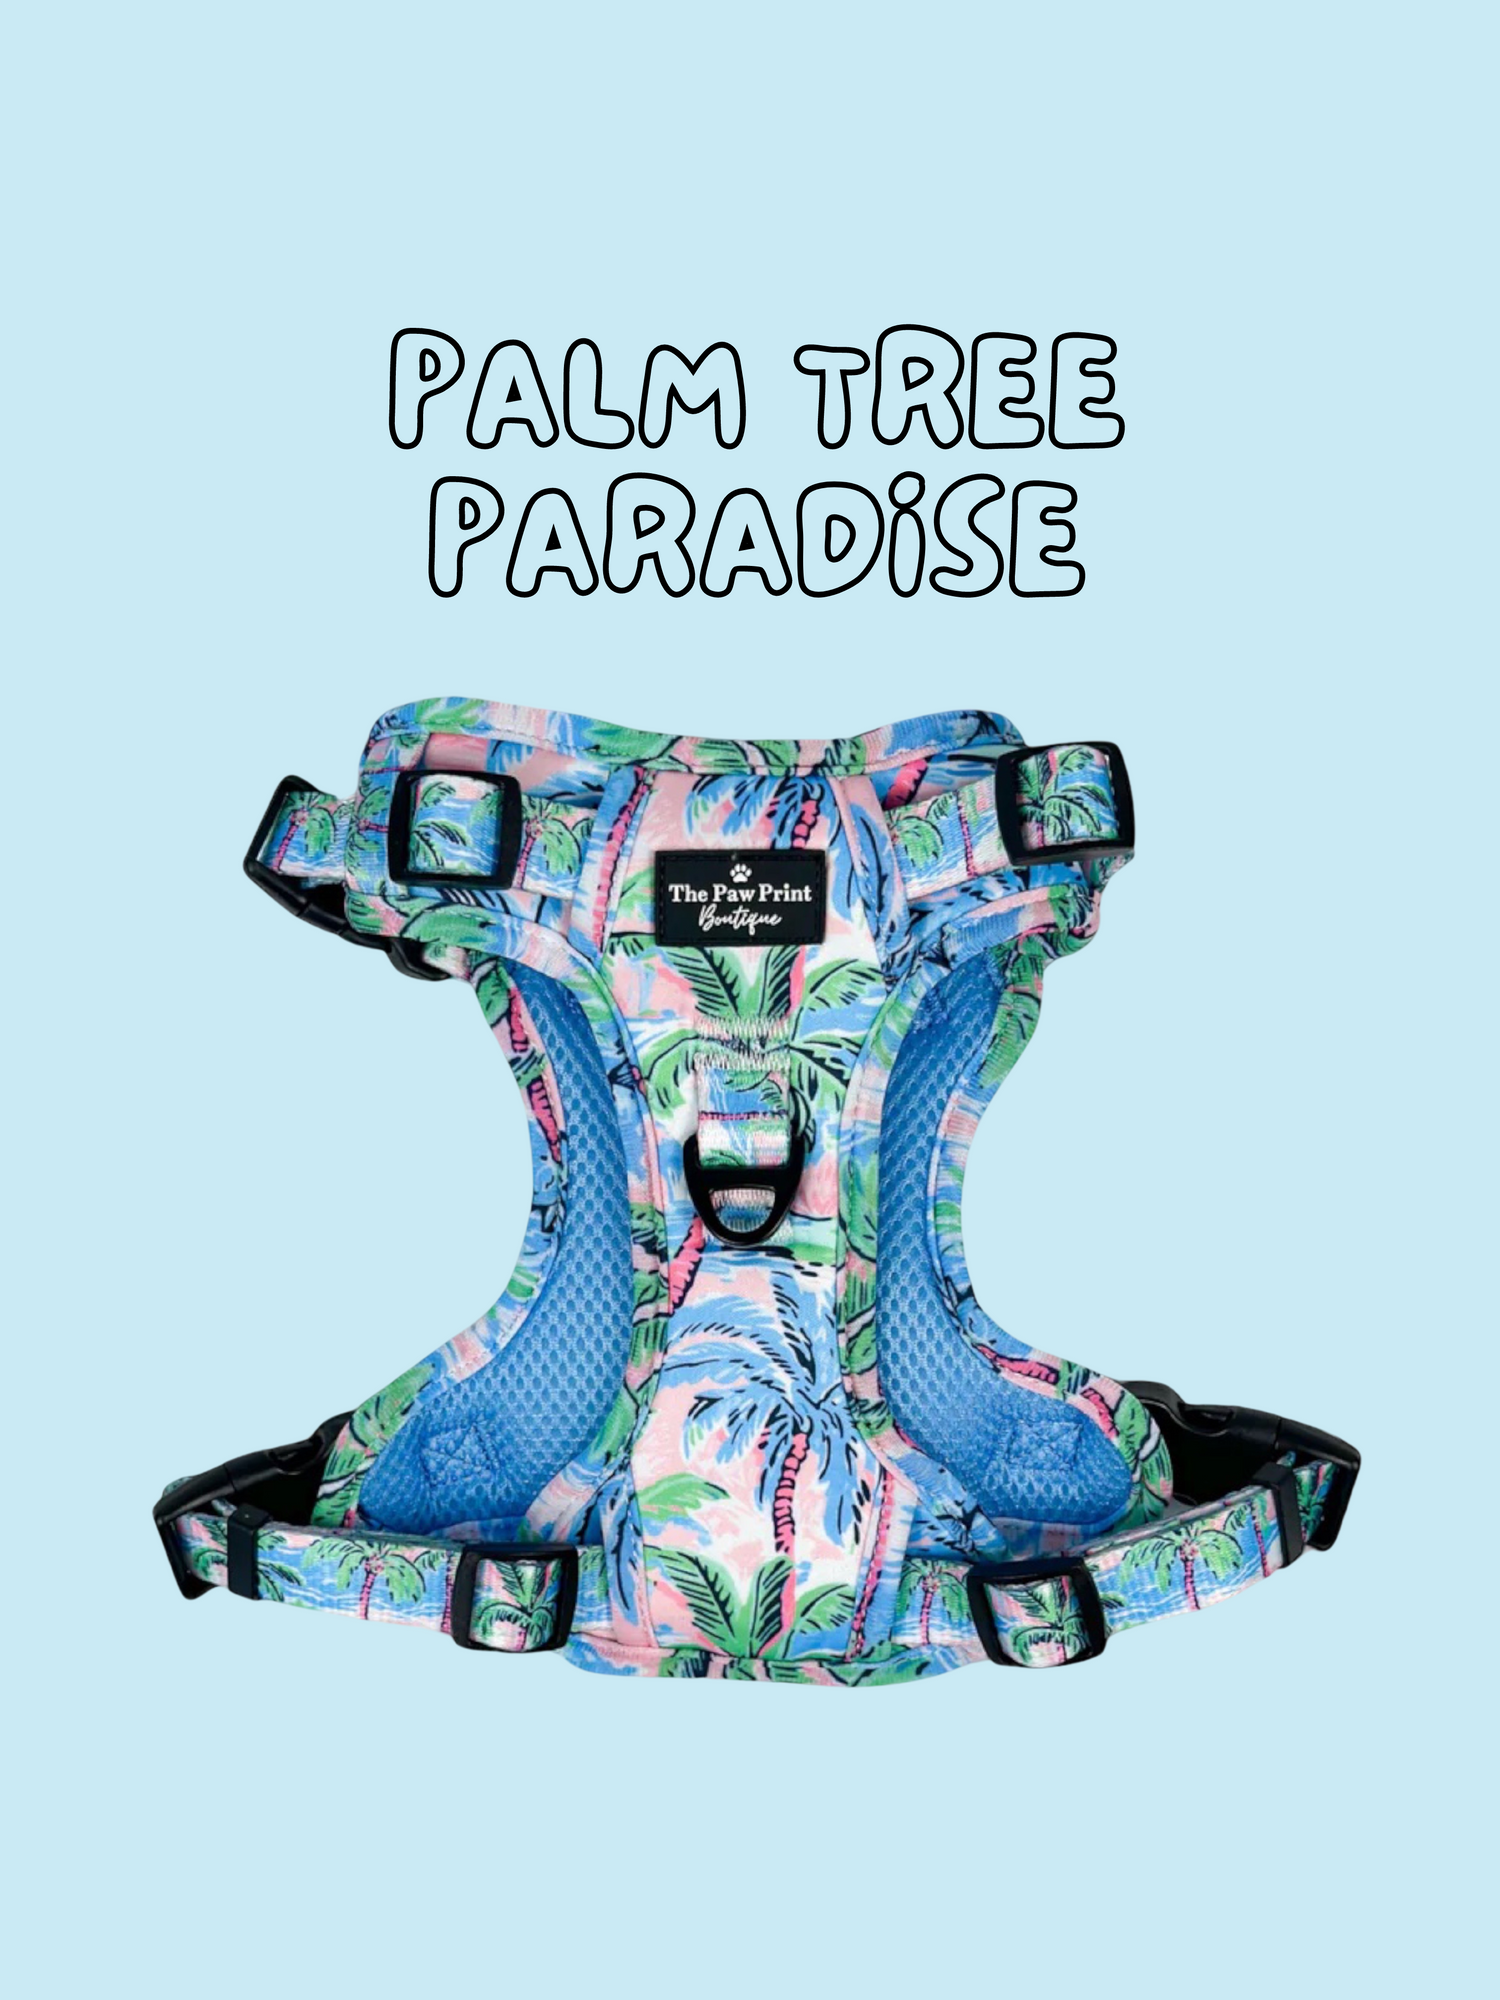 The Palm Tree Paradise Collection